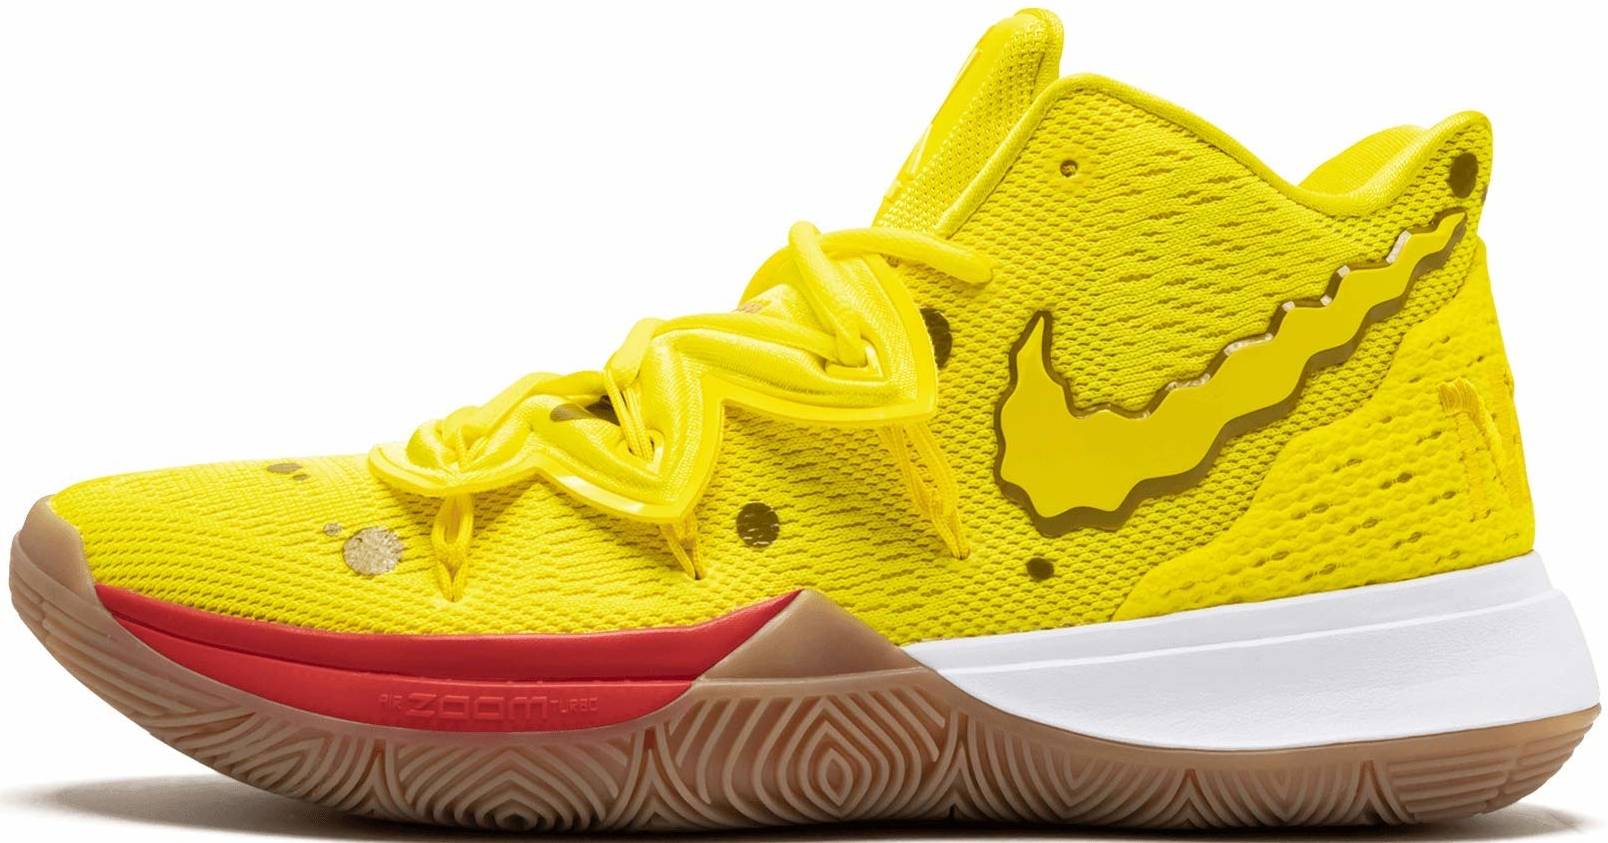 kyrie new shoes 5